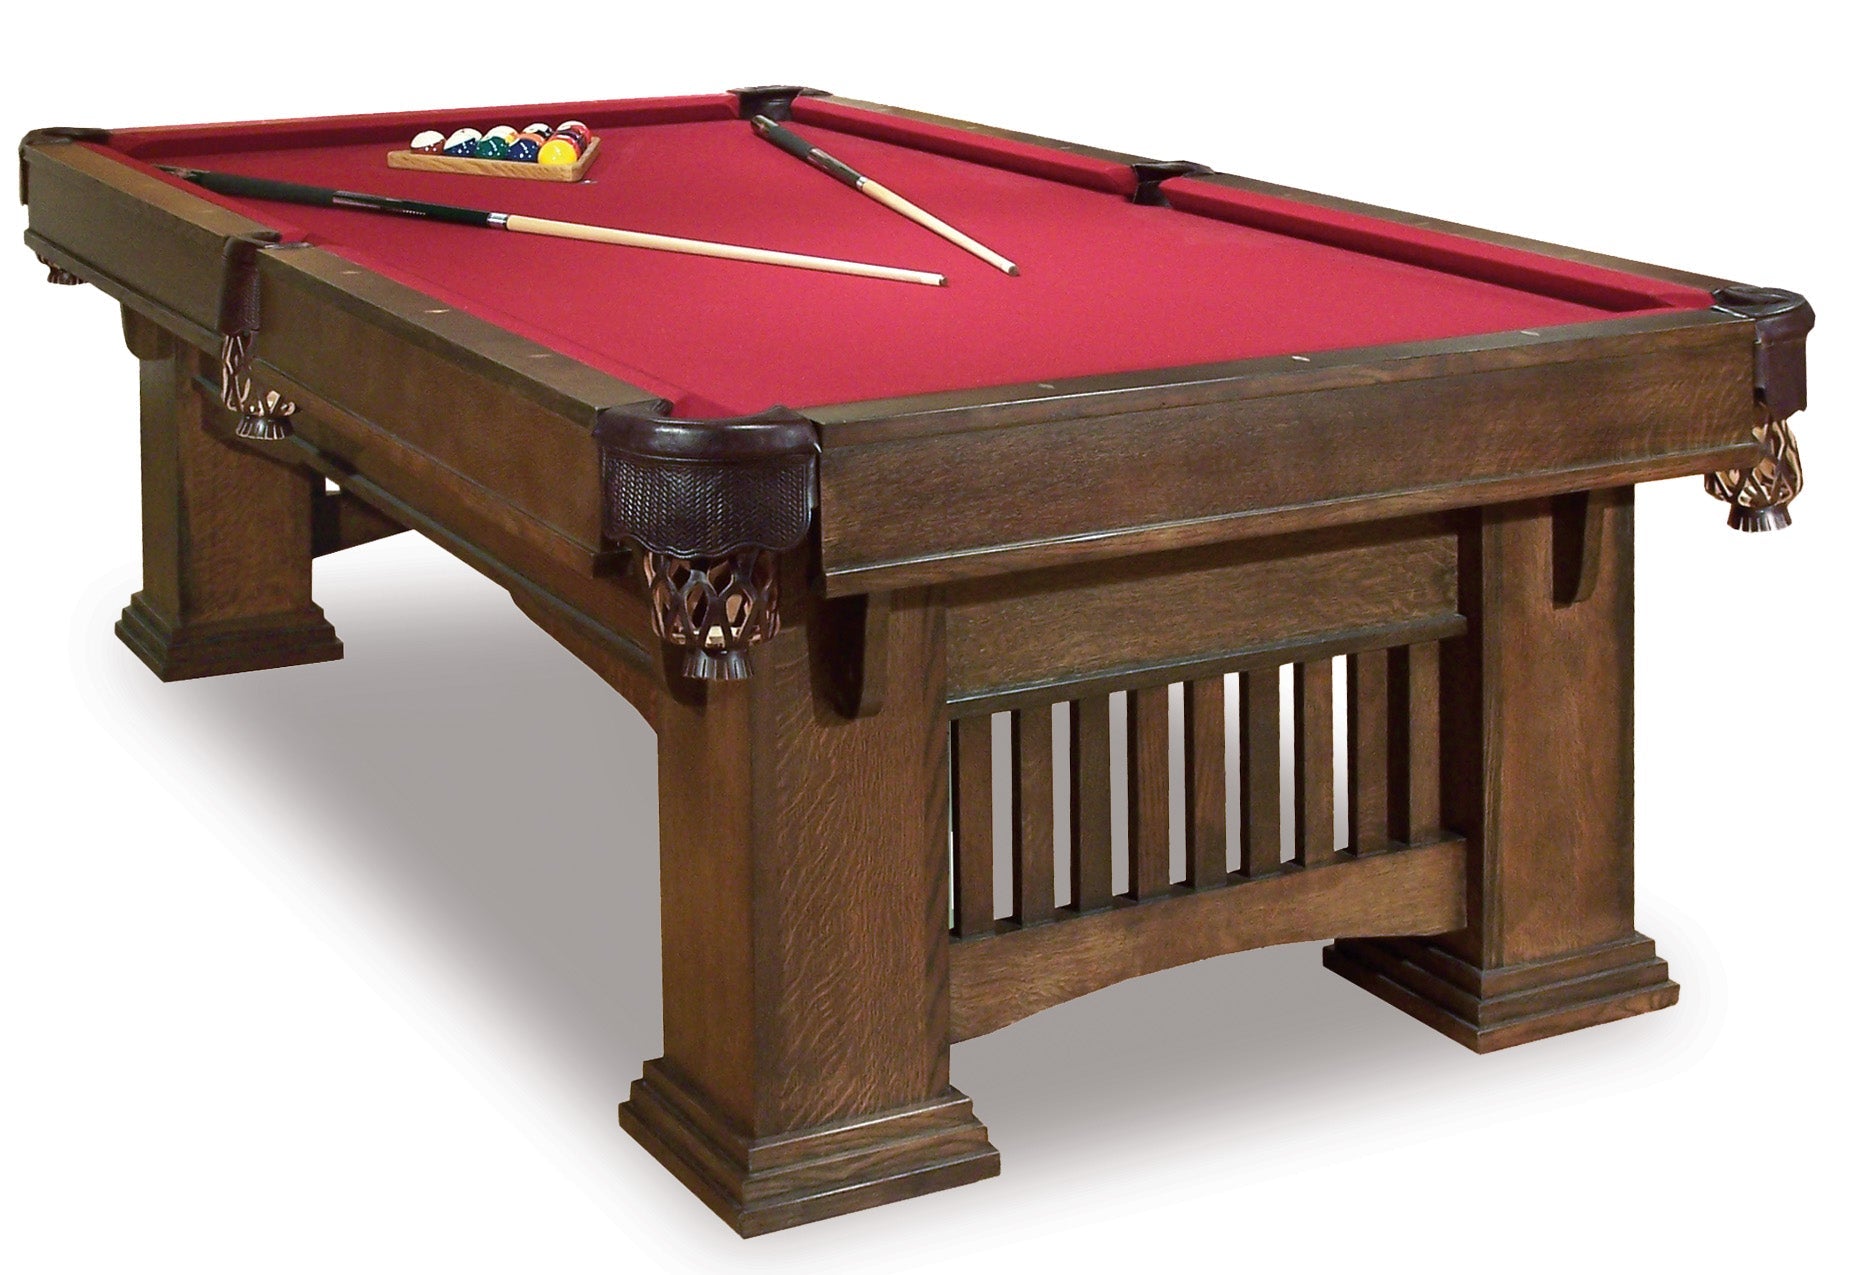 7' Hand-crafted Classic Mission Pool Table (Cherry)